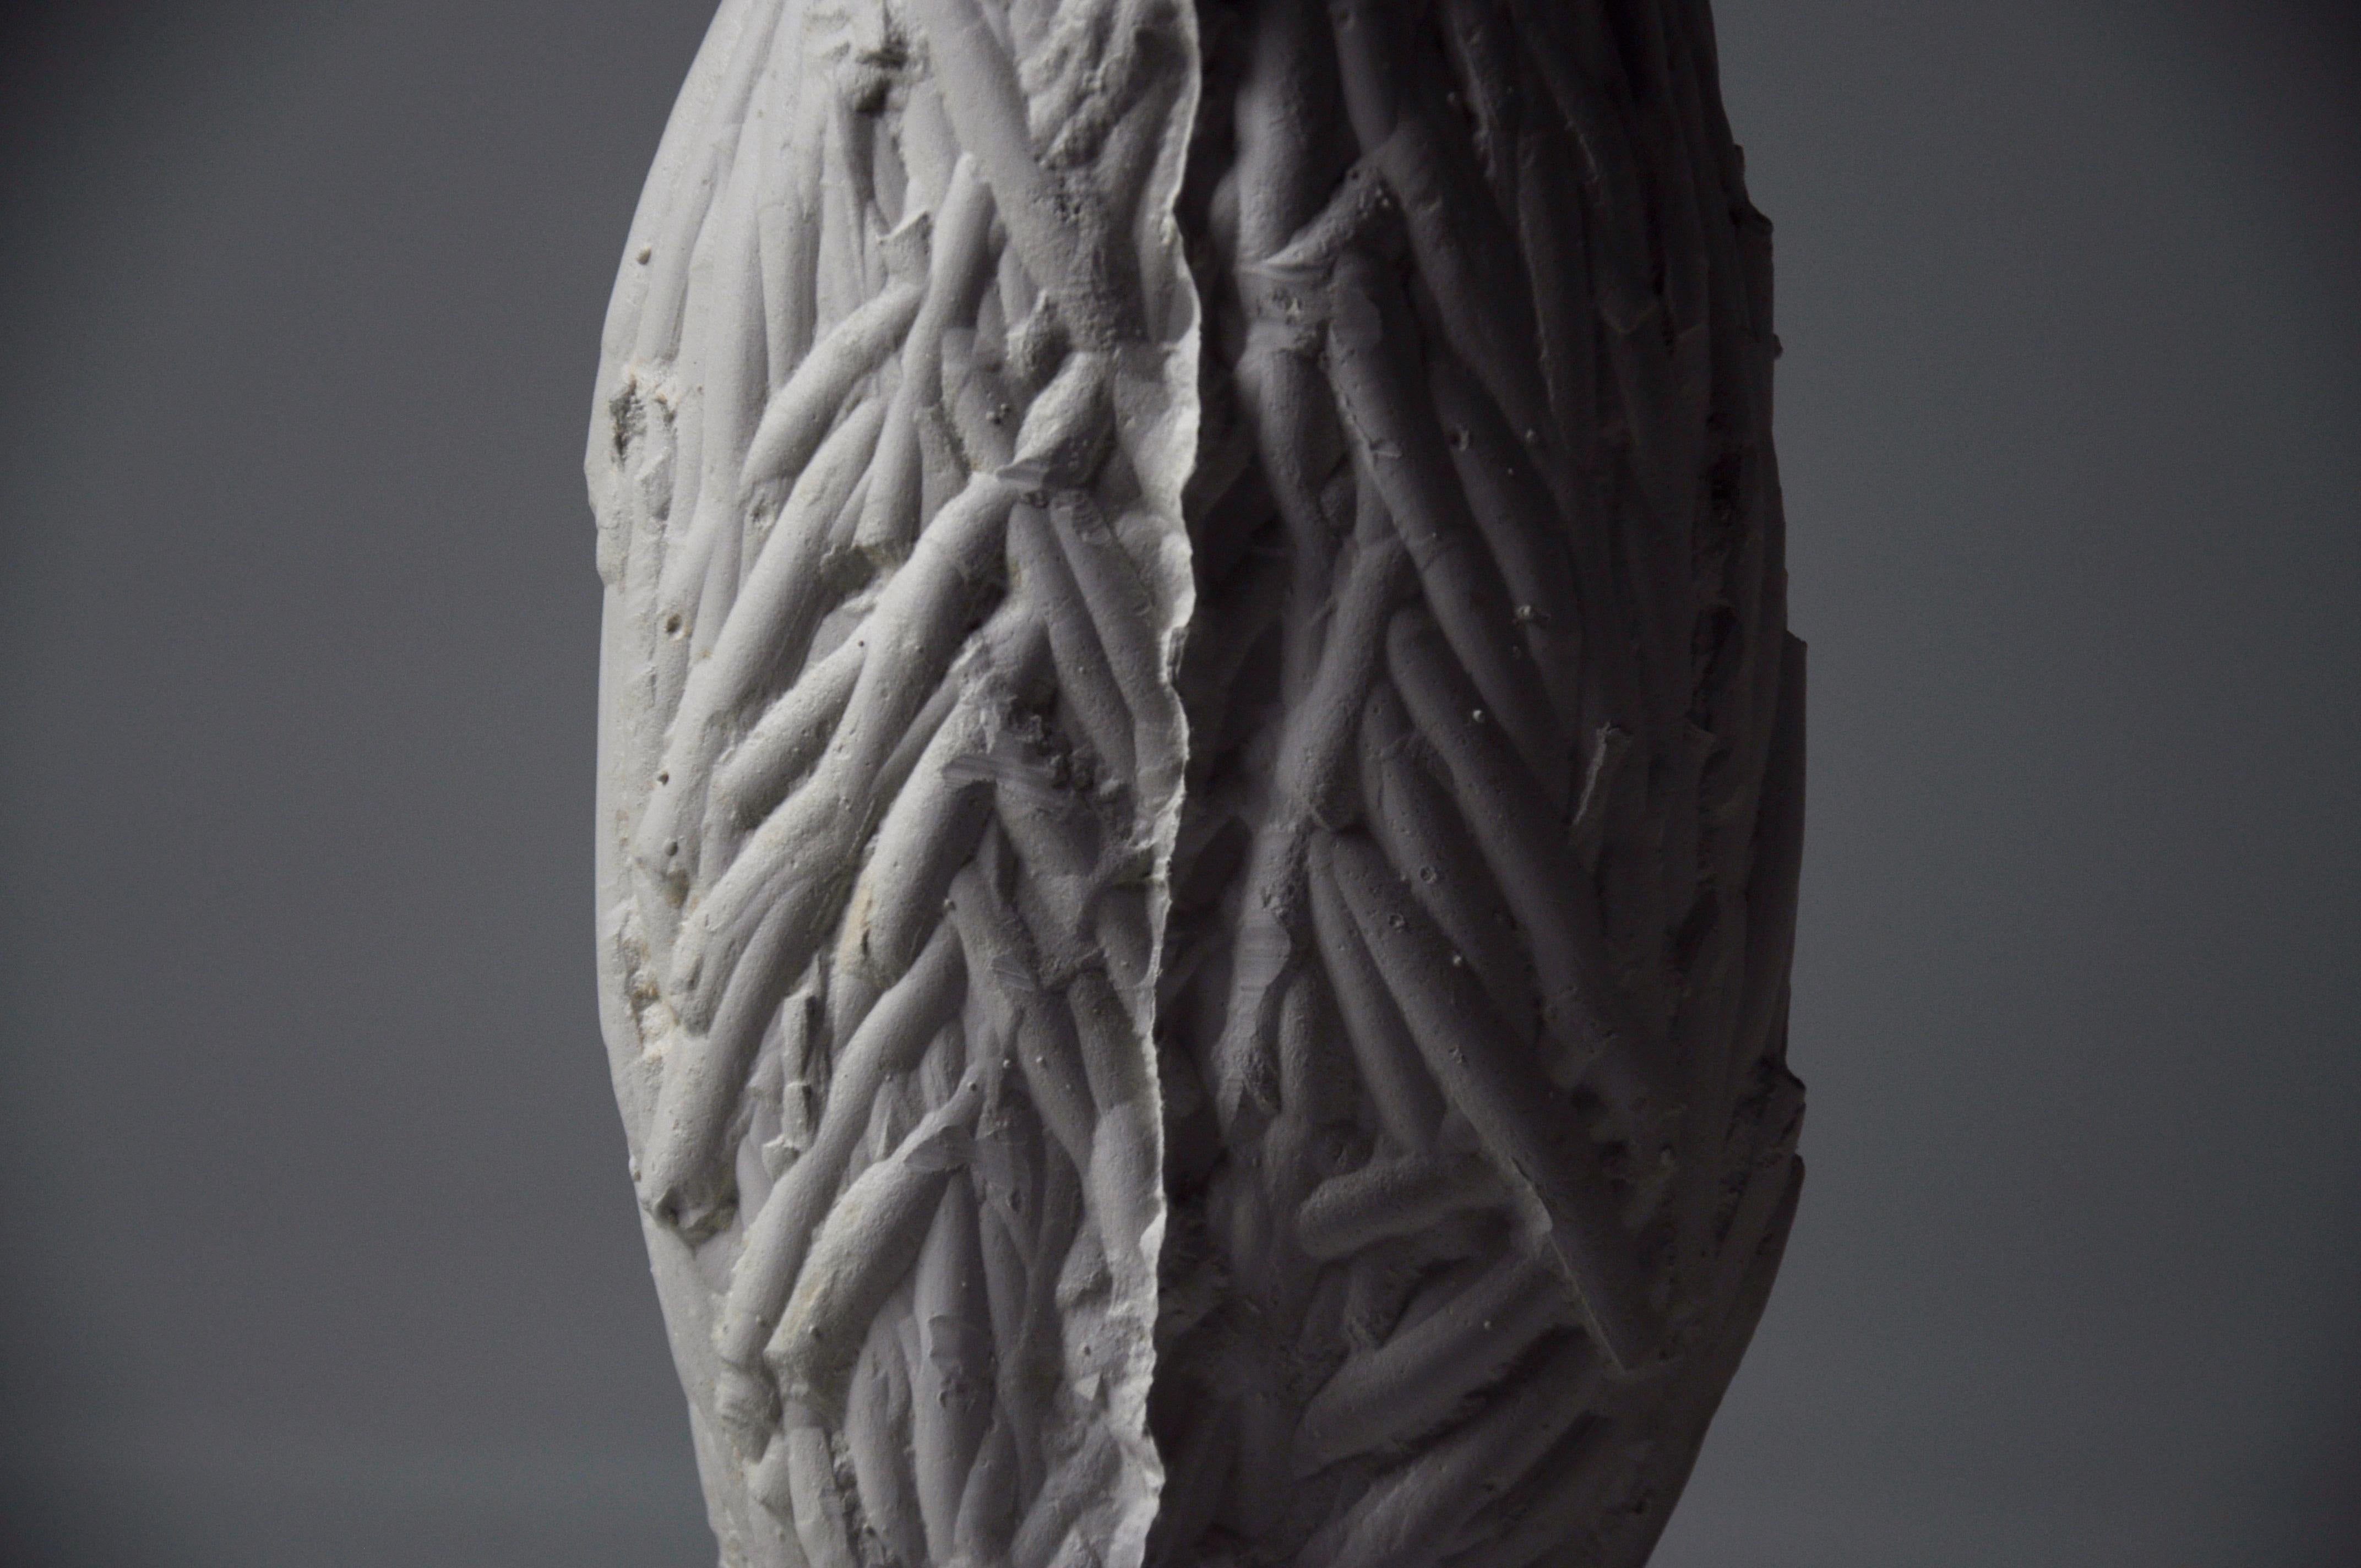 A ceramic collection of sculptural functional objects inspired by the parallel line between the process of ceramic casting and the growth and decay of organic beings.
Through experimenting with different ways of creating “erosion” or 